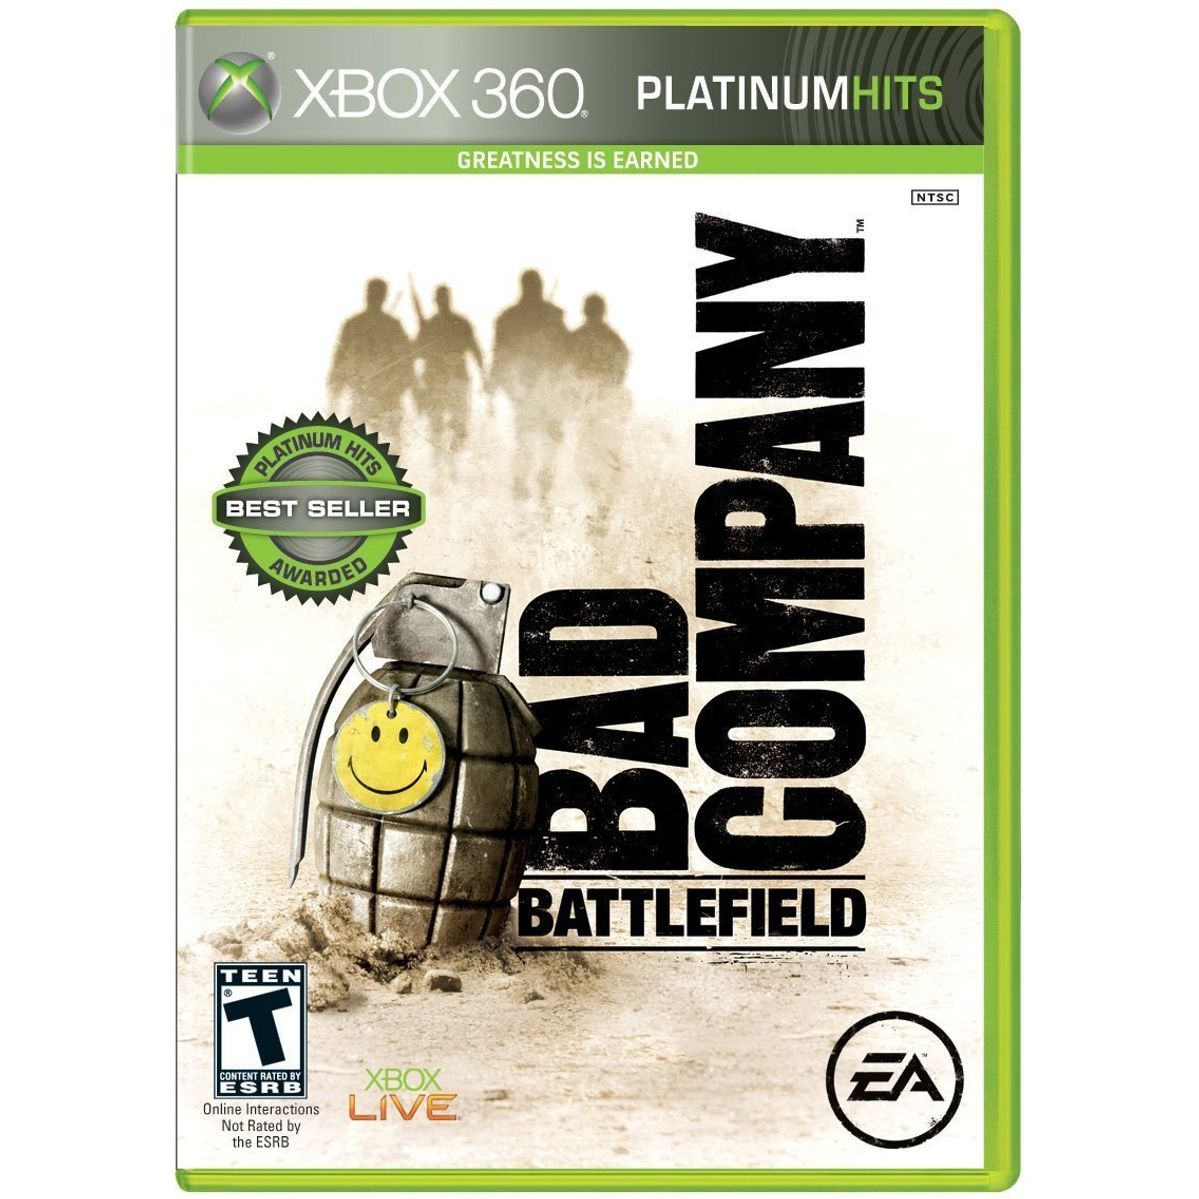 Battlefield Bad Company Platinum Hits Microsoft Xbox 360 Game from 2P Gaming